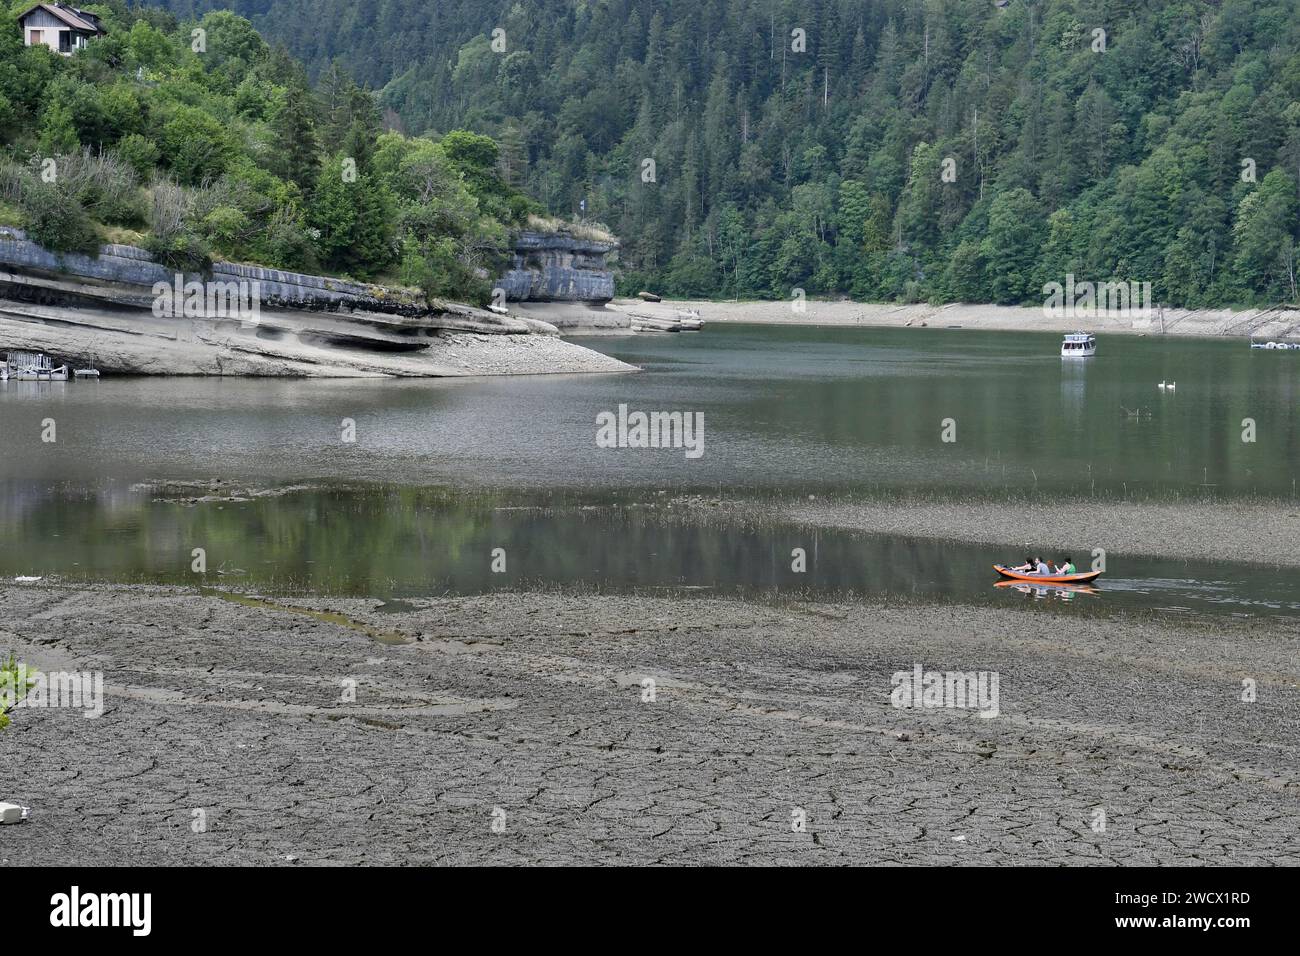 France, Doubs, Villers le Lac, Doubs valley, drought, canoeing Stock Photo